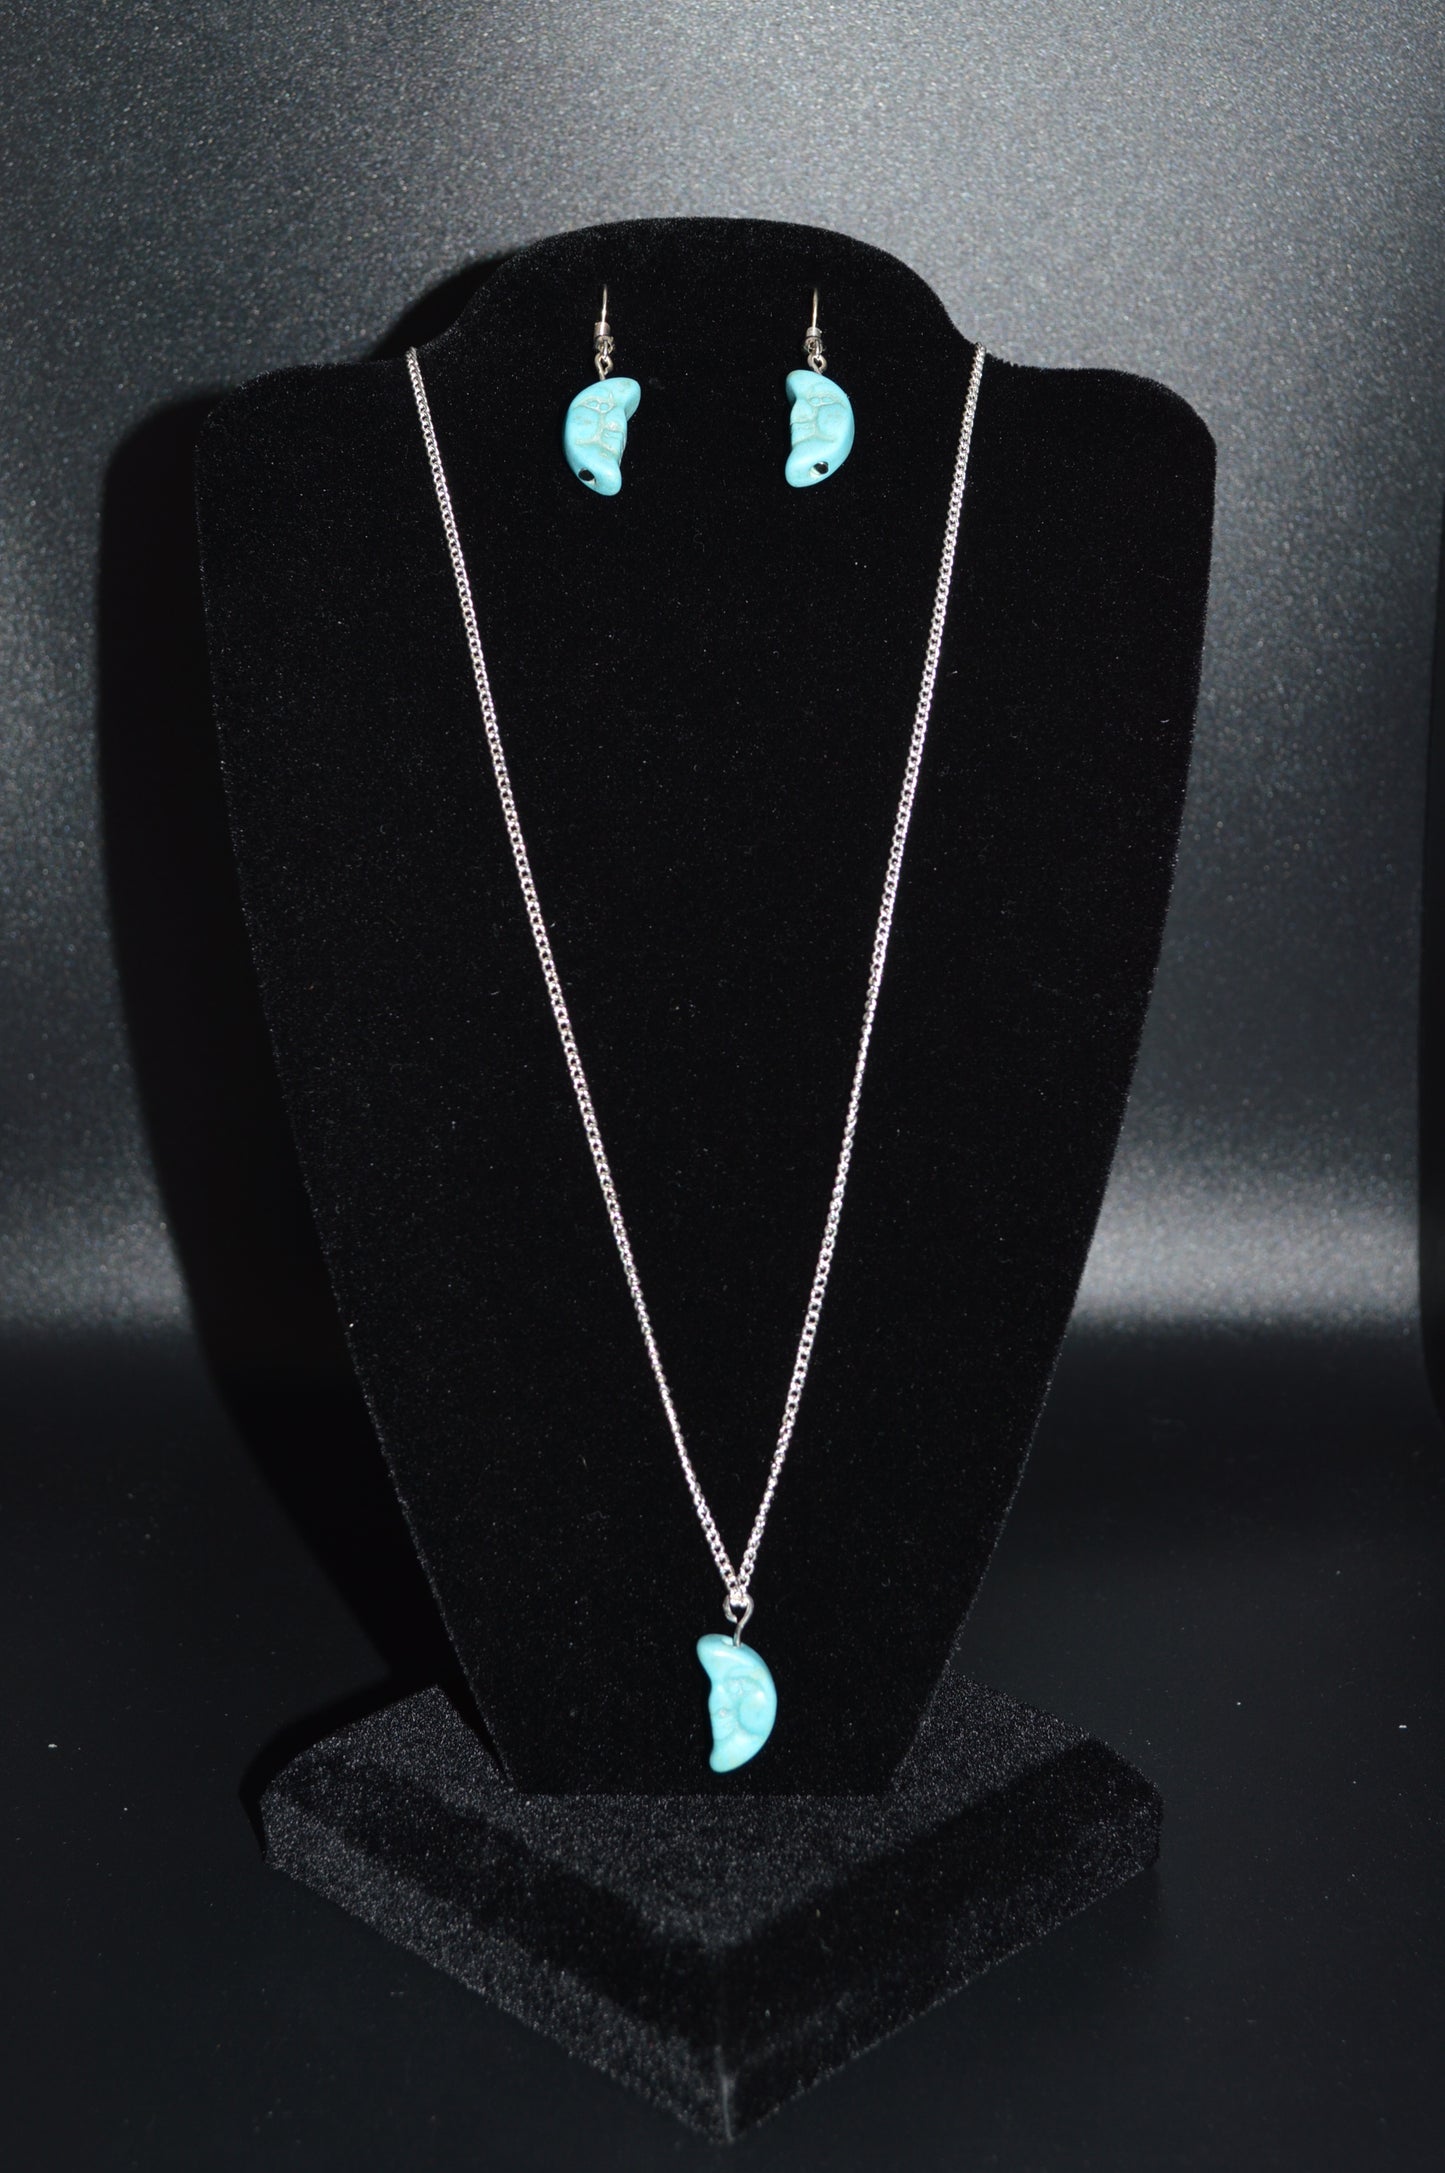 Resin Moon Pendant Necklace and Earring Set (Turquoise)